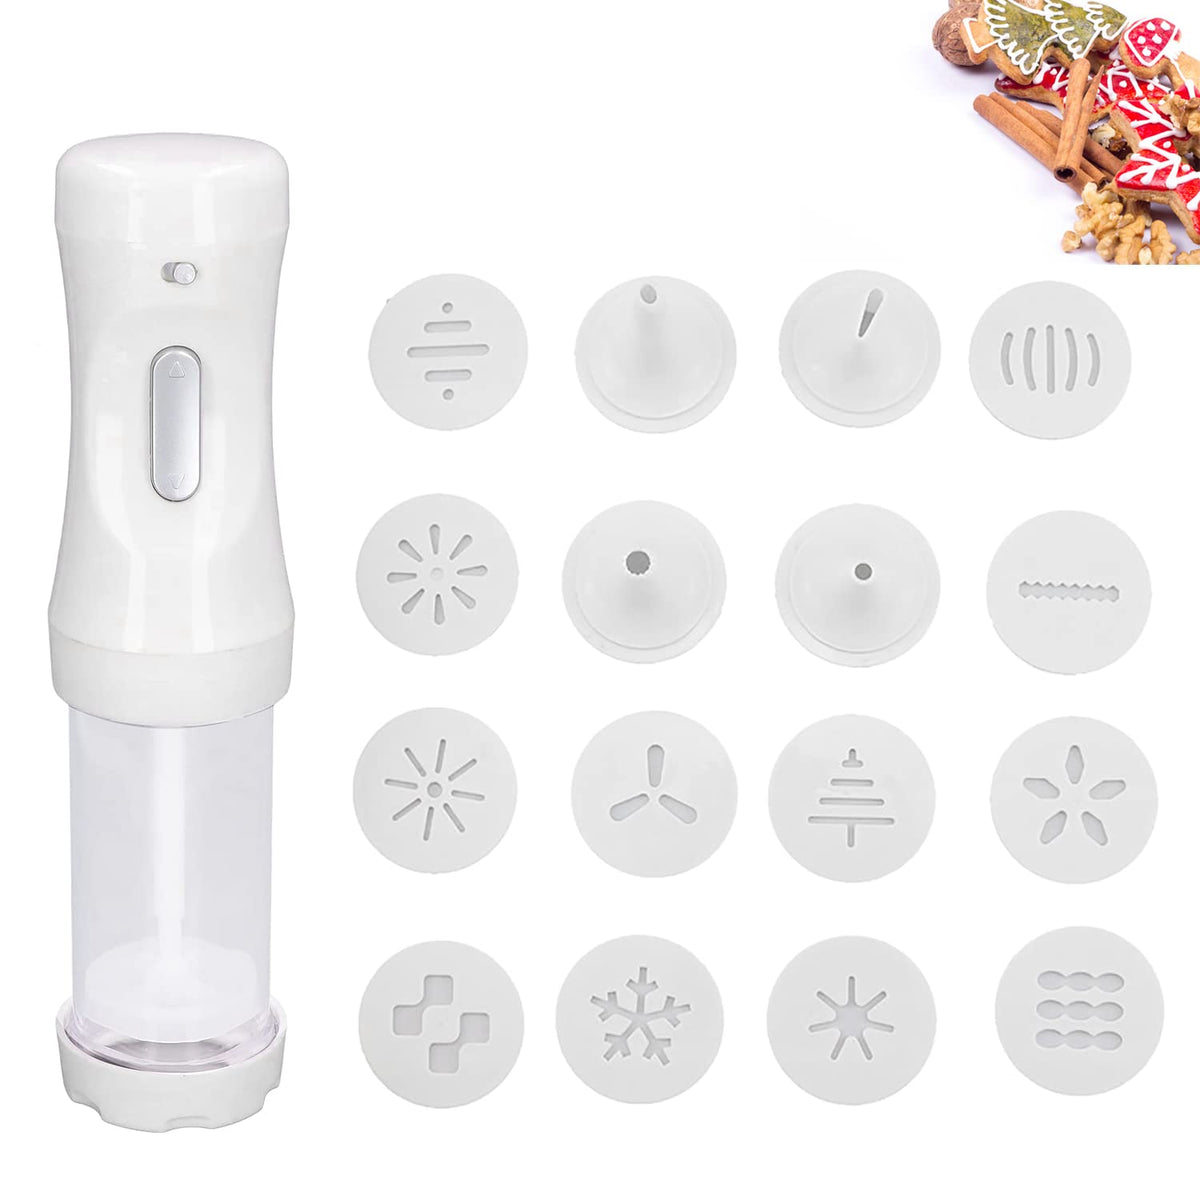 Suuker Cookie Press Gun Kit, Spritz Cookie Press Set for Baking Cookie  Decorating Kit with 12 Cookie Press Discs and 6 Piping Tips for DIY Biscuit